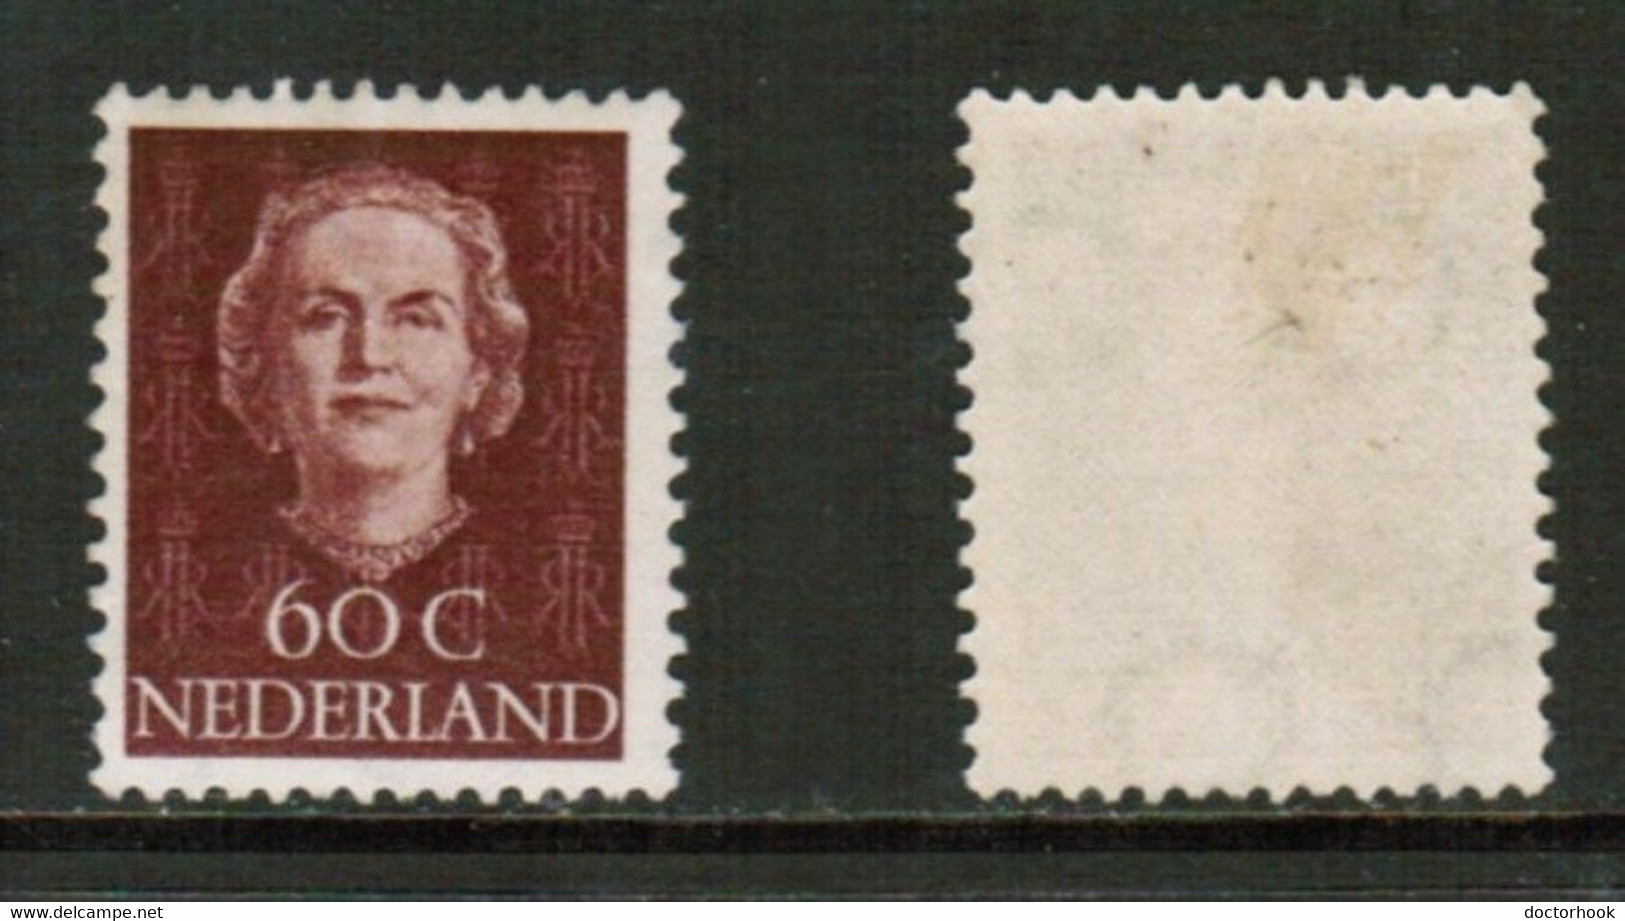 NETHERLANDS  Scott # 318* VF MINT LH (CONDITION AS PER SCAN) (WW-1-66) - Unused Stamps